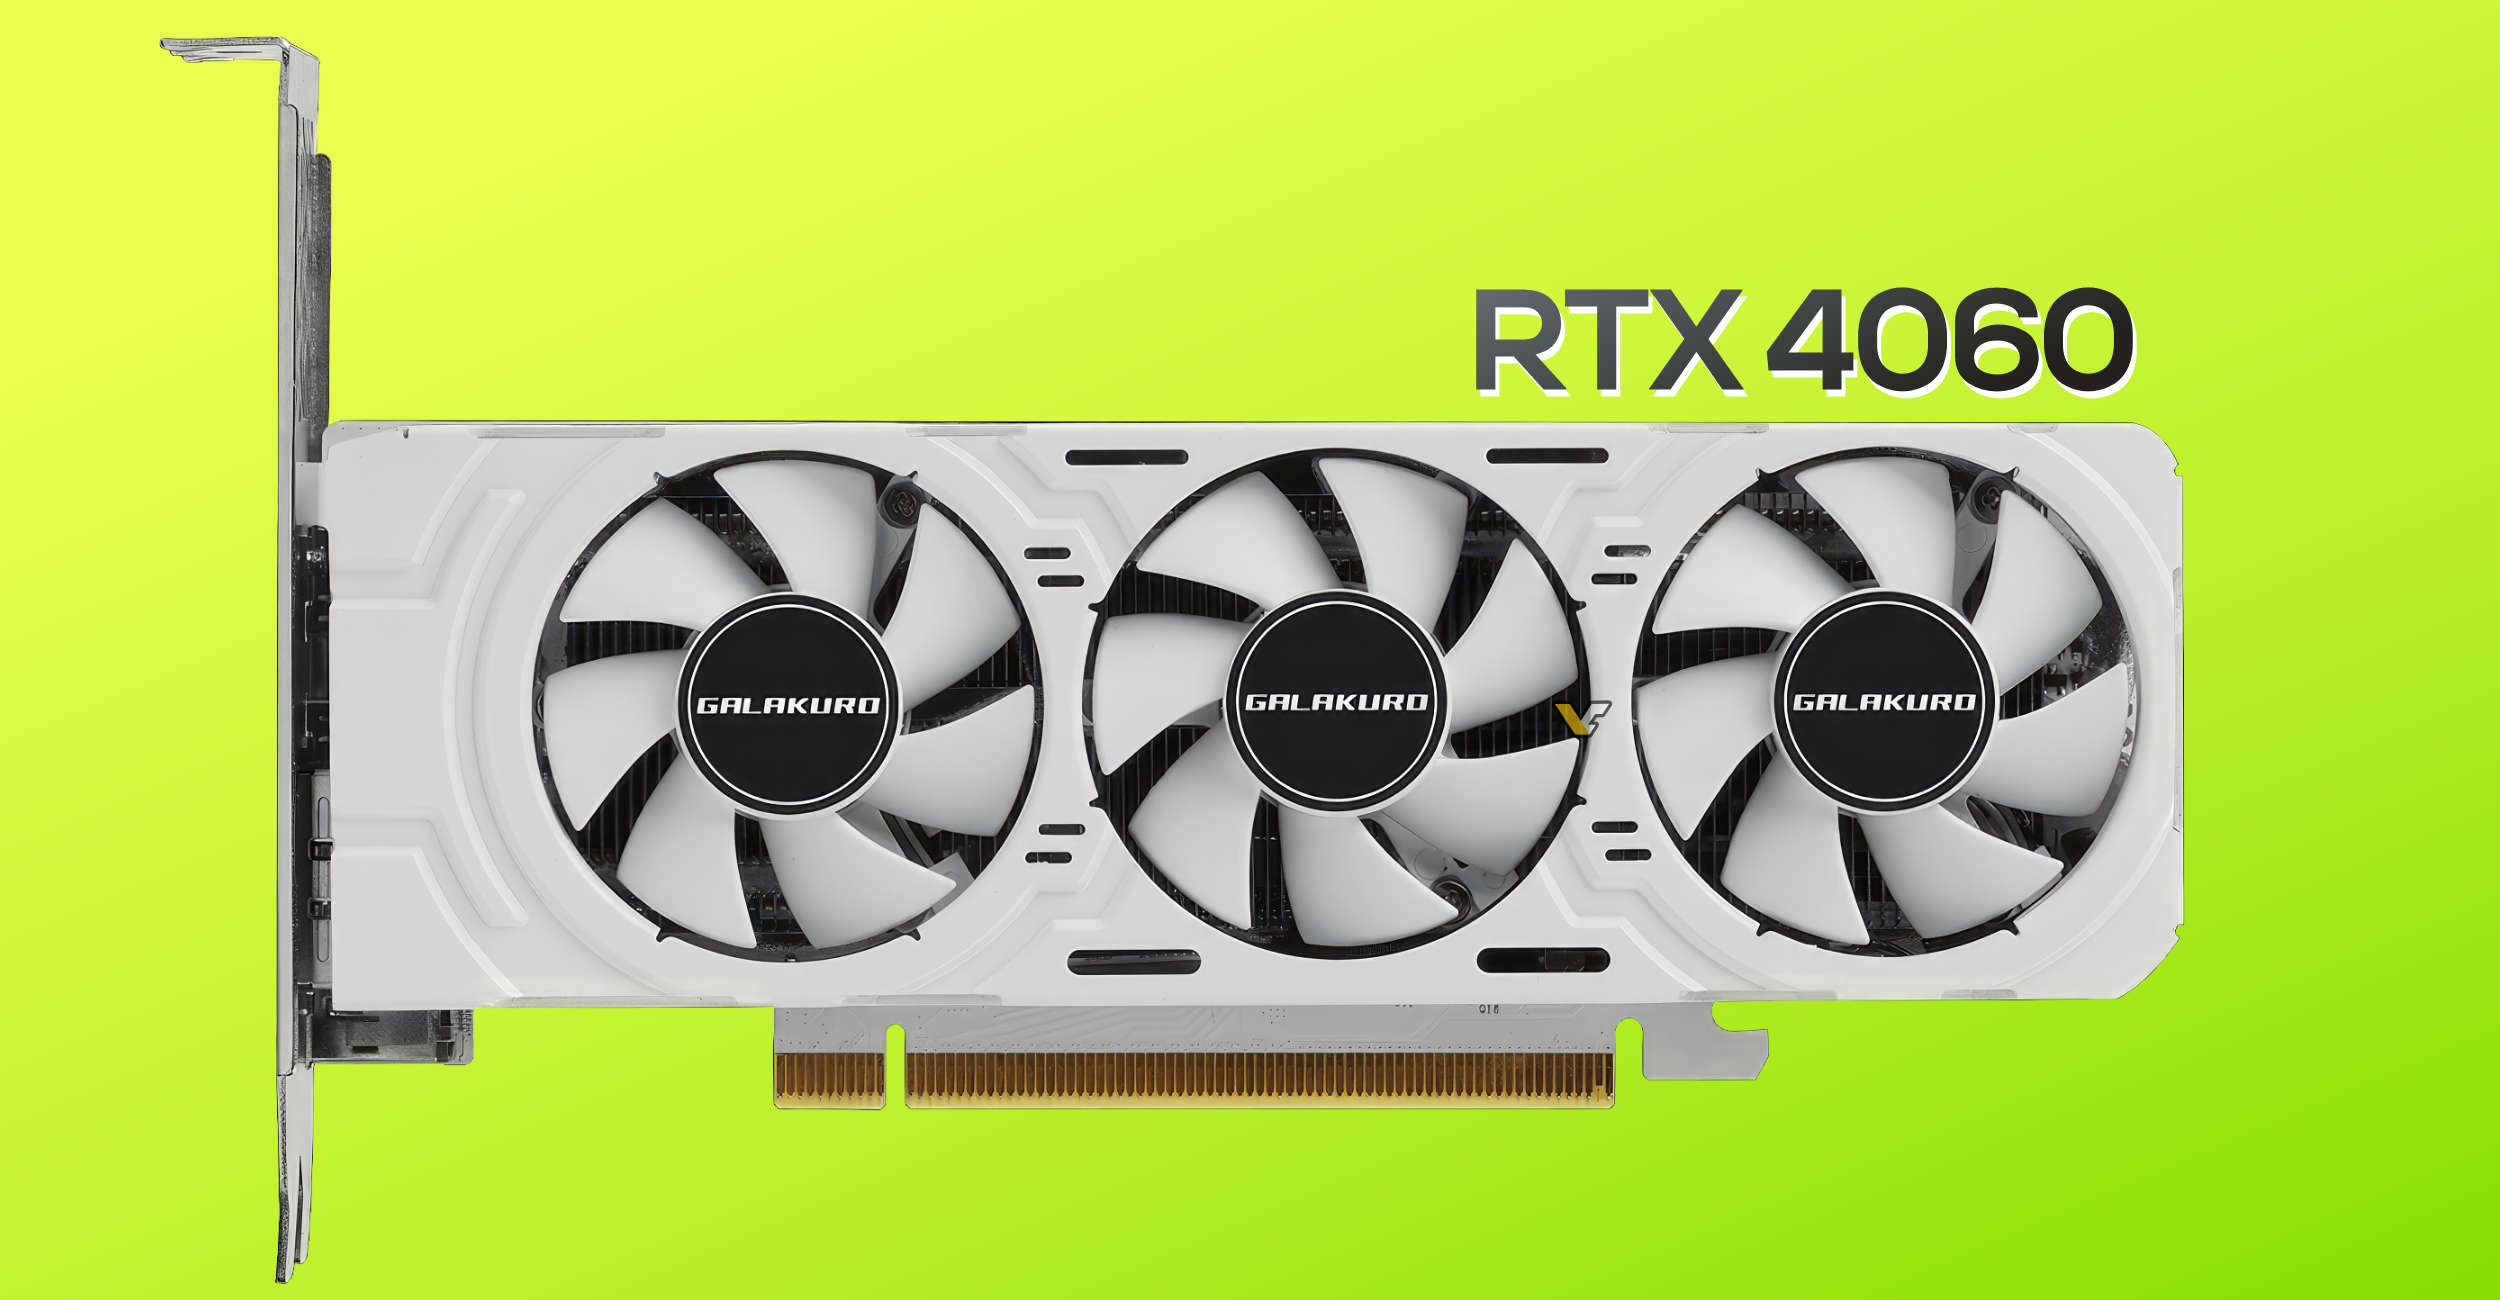 GALAX launches all-white GeForce RTX 4060 low-profile GPU with ...